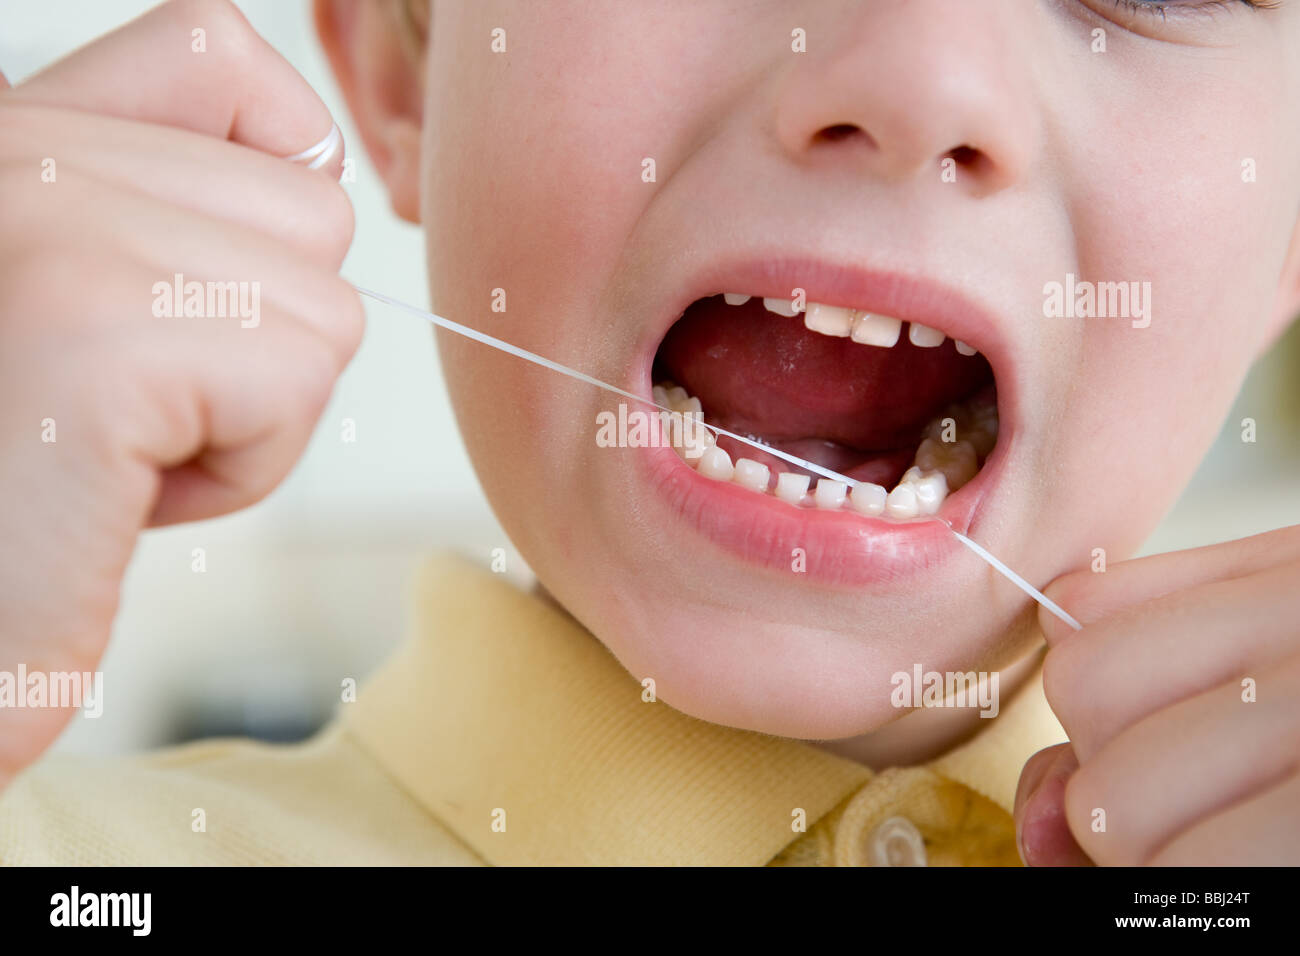 A small boy using Dental floss to care for teeth and gums Stock Photo